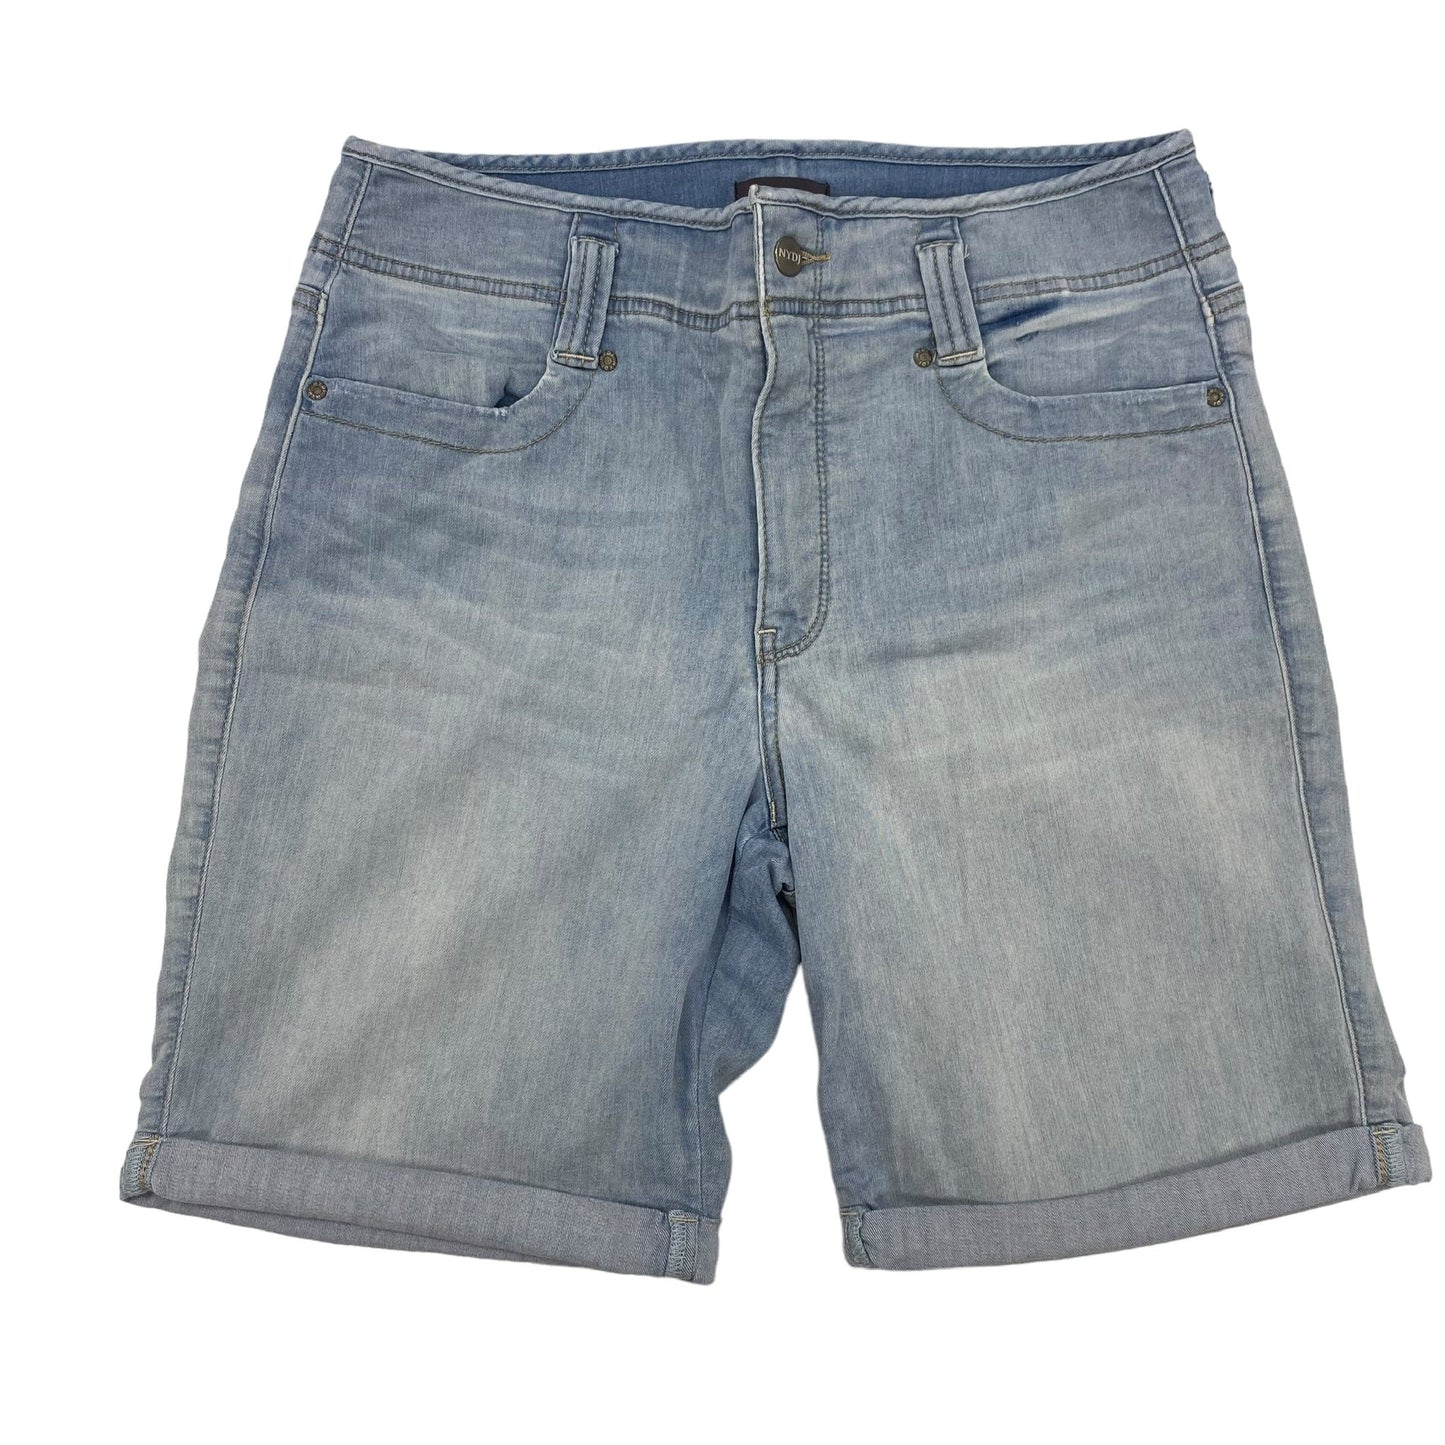 Blue Denim Shorts Not Your Daughters Jeans, Size 10